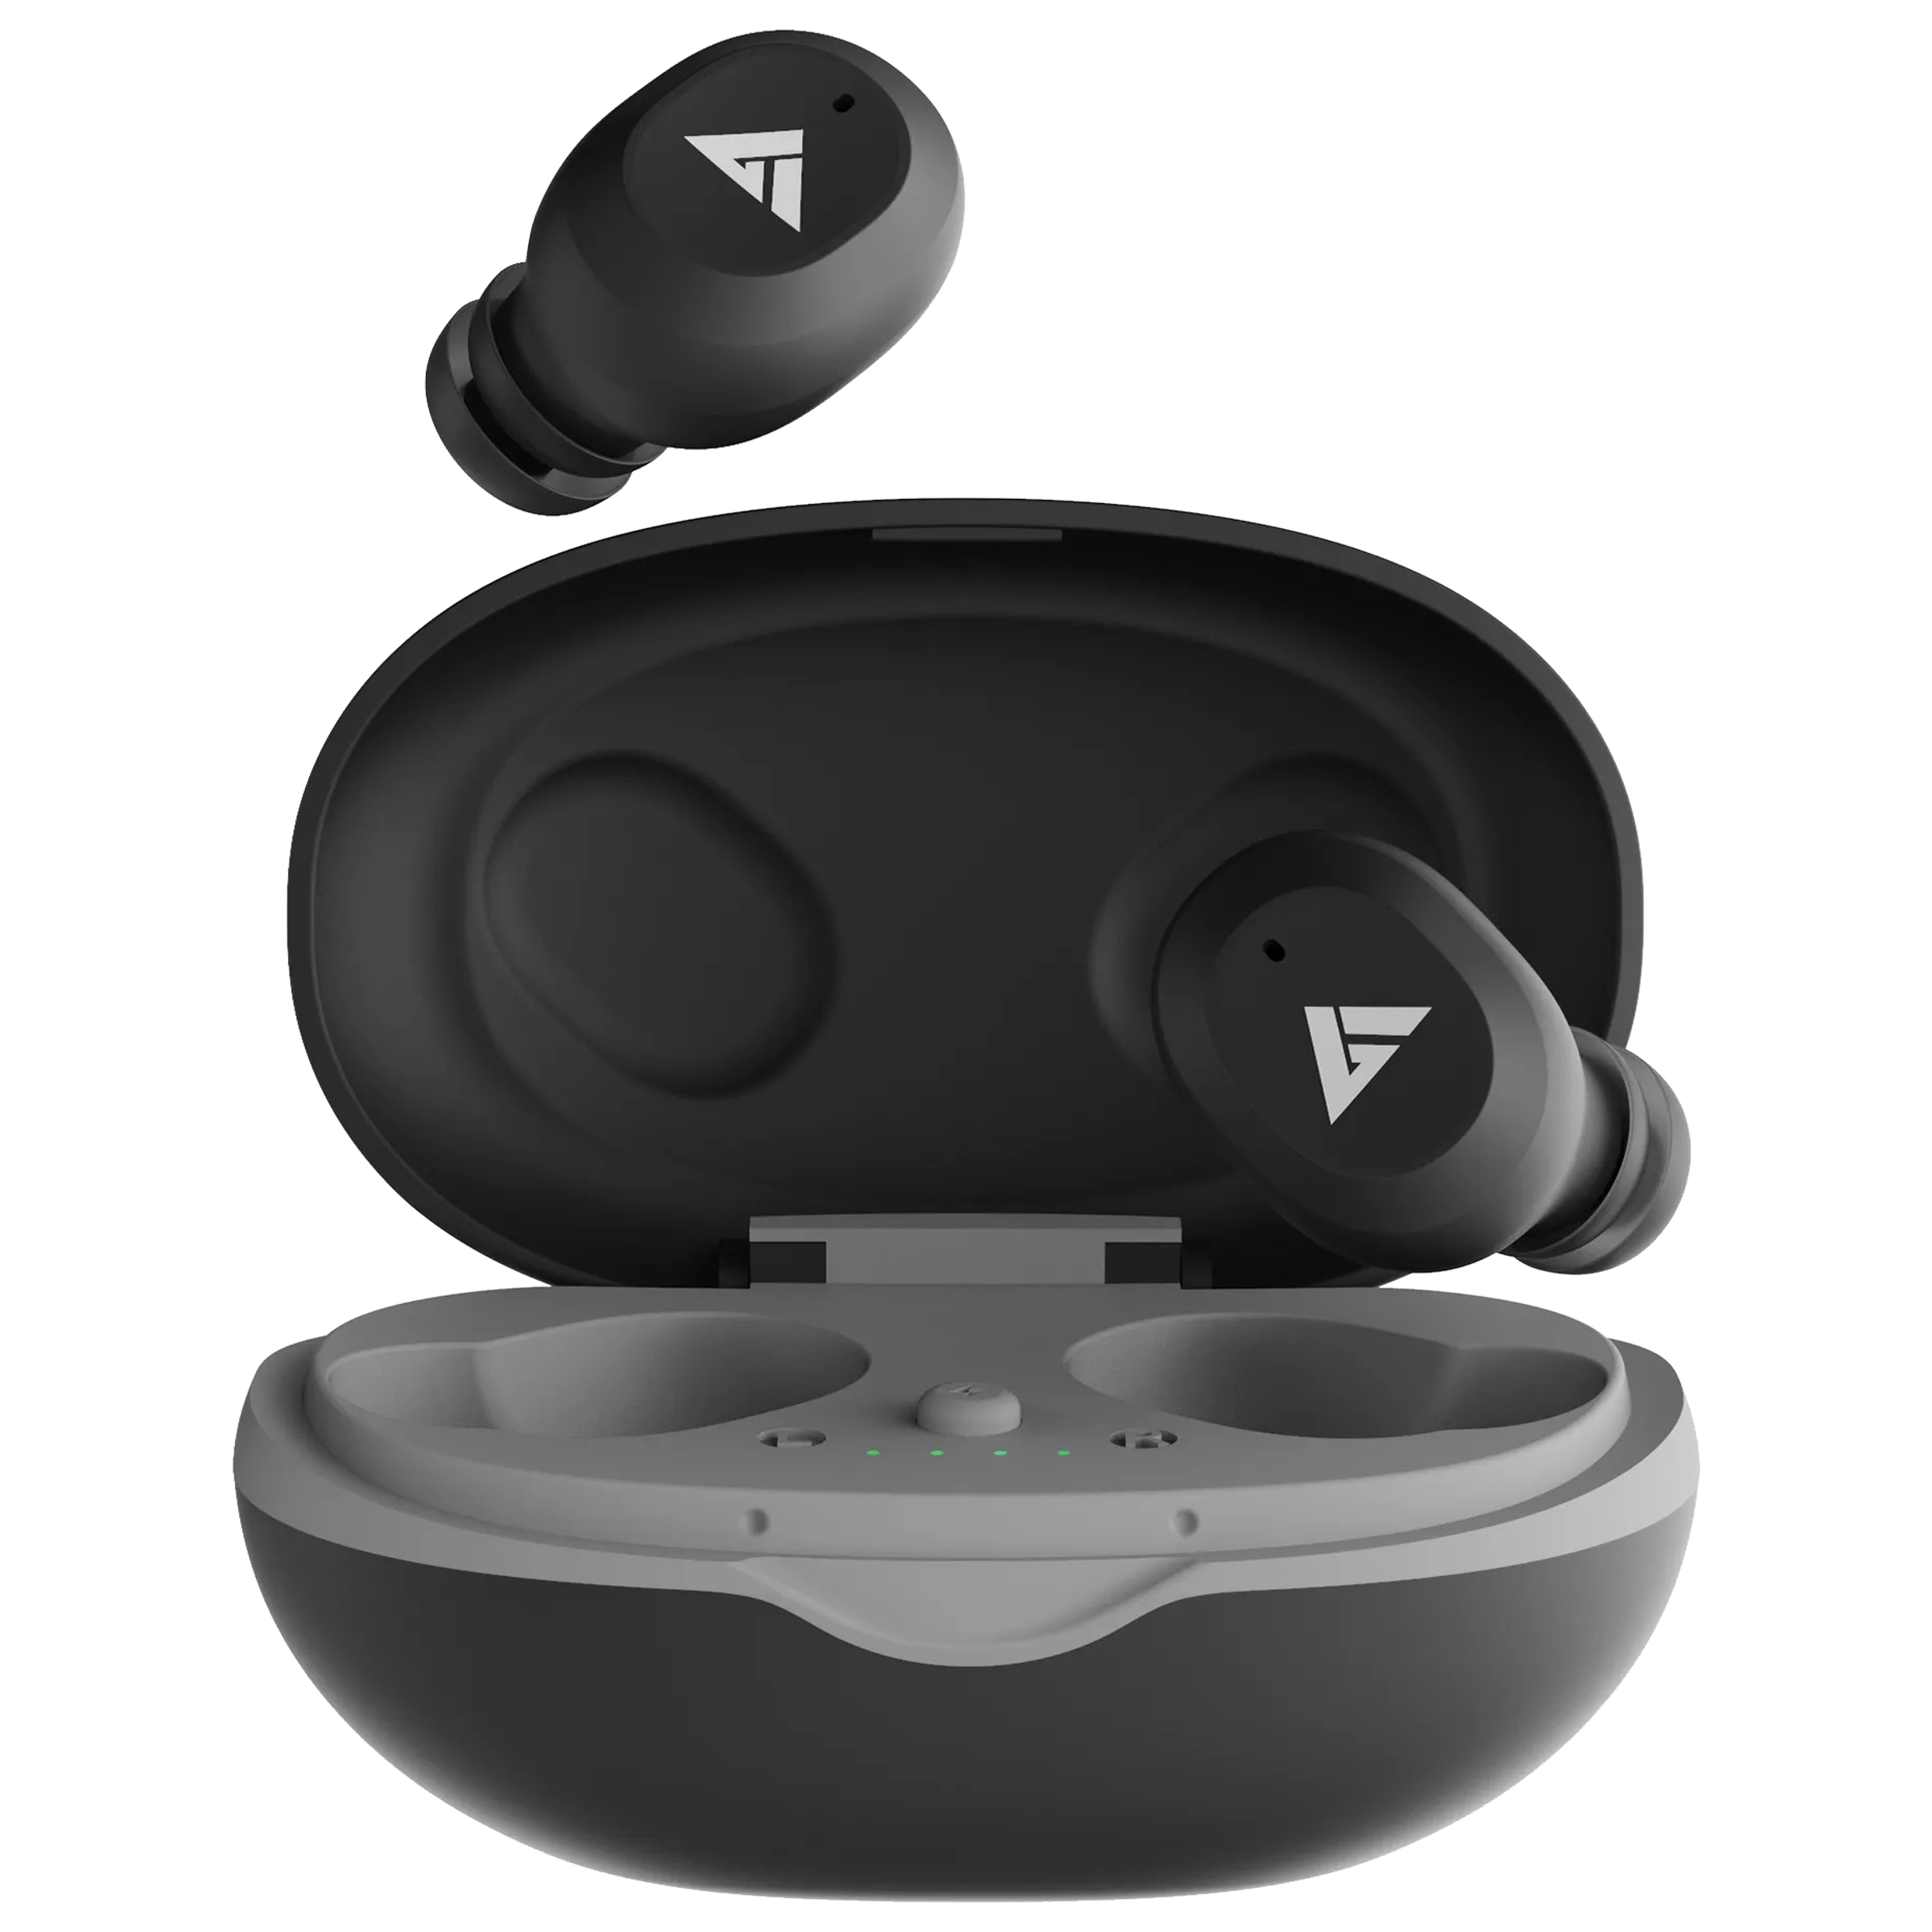 Boult Audio AirBass Combuds BA-RD-Combuds In-Ear Truly Wireless Earbuds With Mic (Bluetooth 5.0, Microwoofers, Black)_1